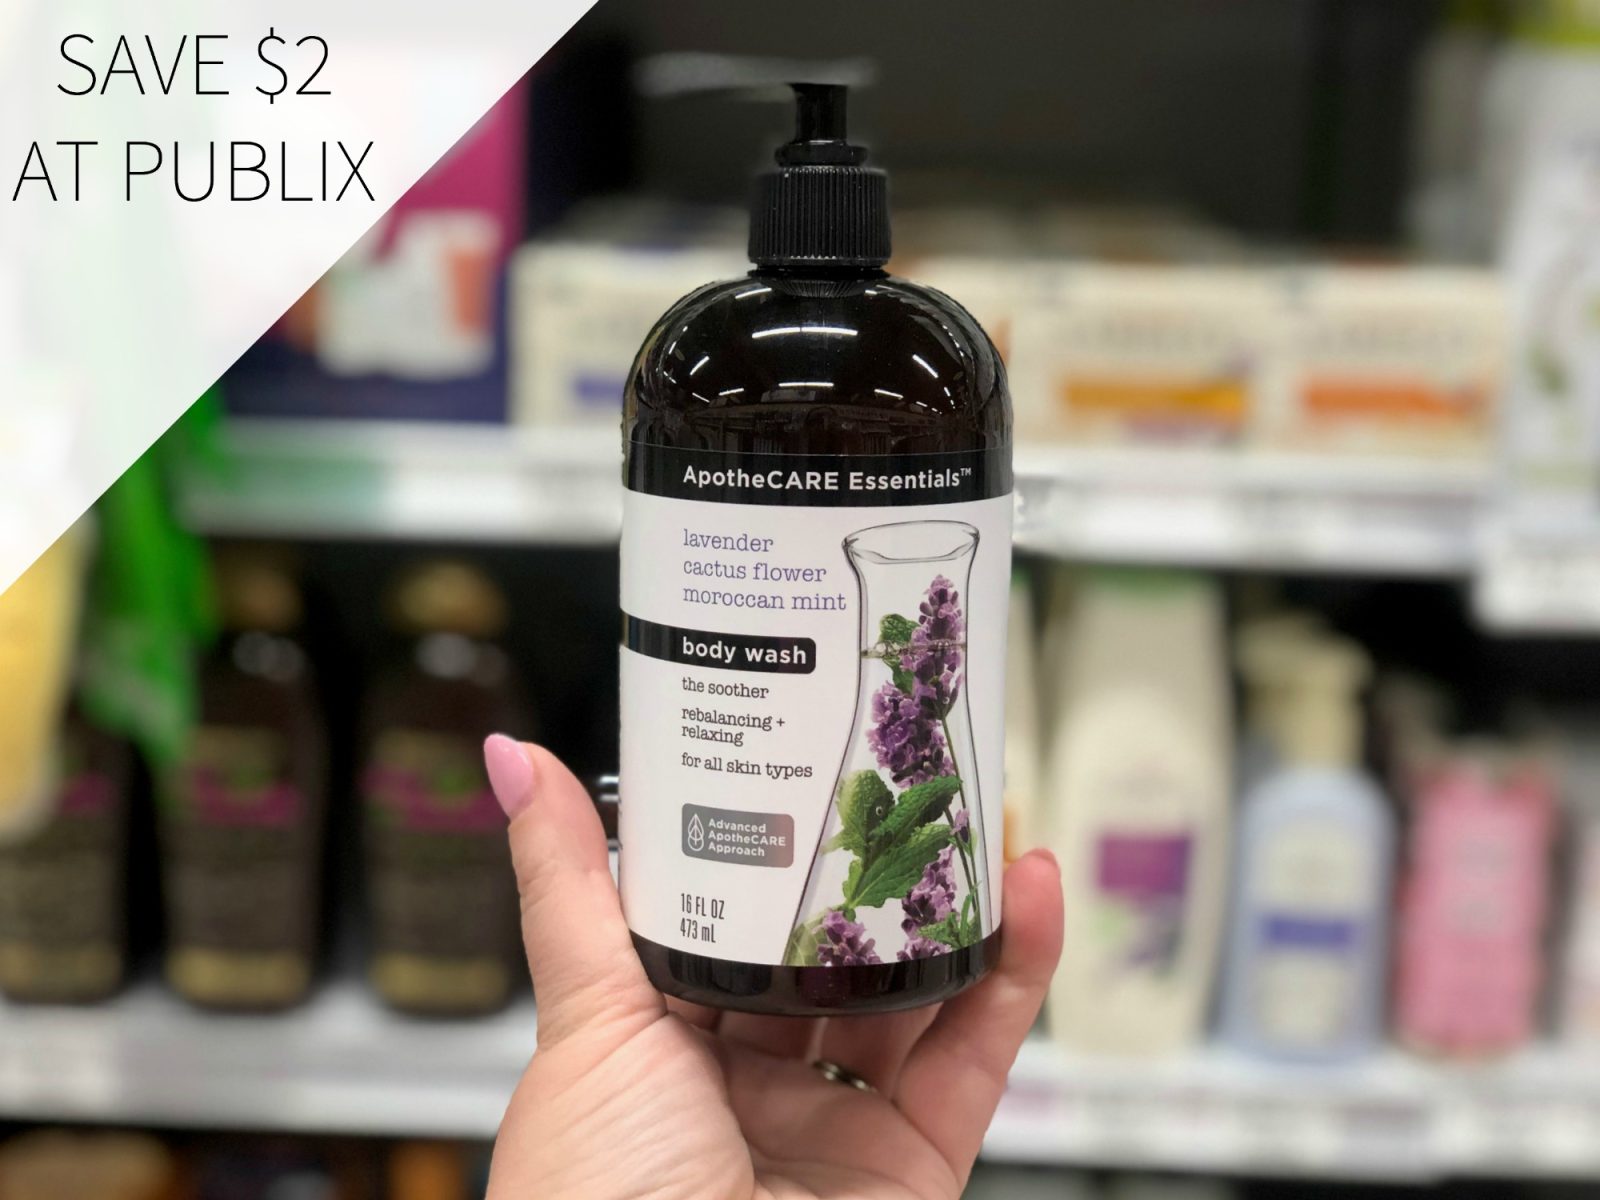 Save $2 On ApotheCARE Body Wash At Publix – Clip The Big Digital Coupon